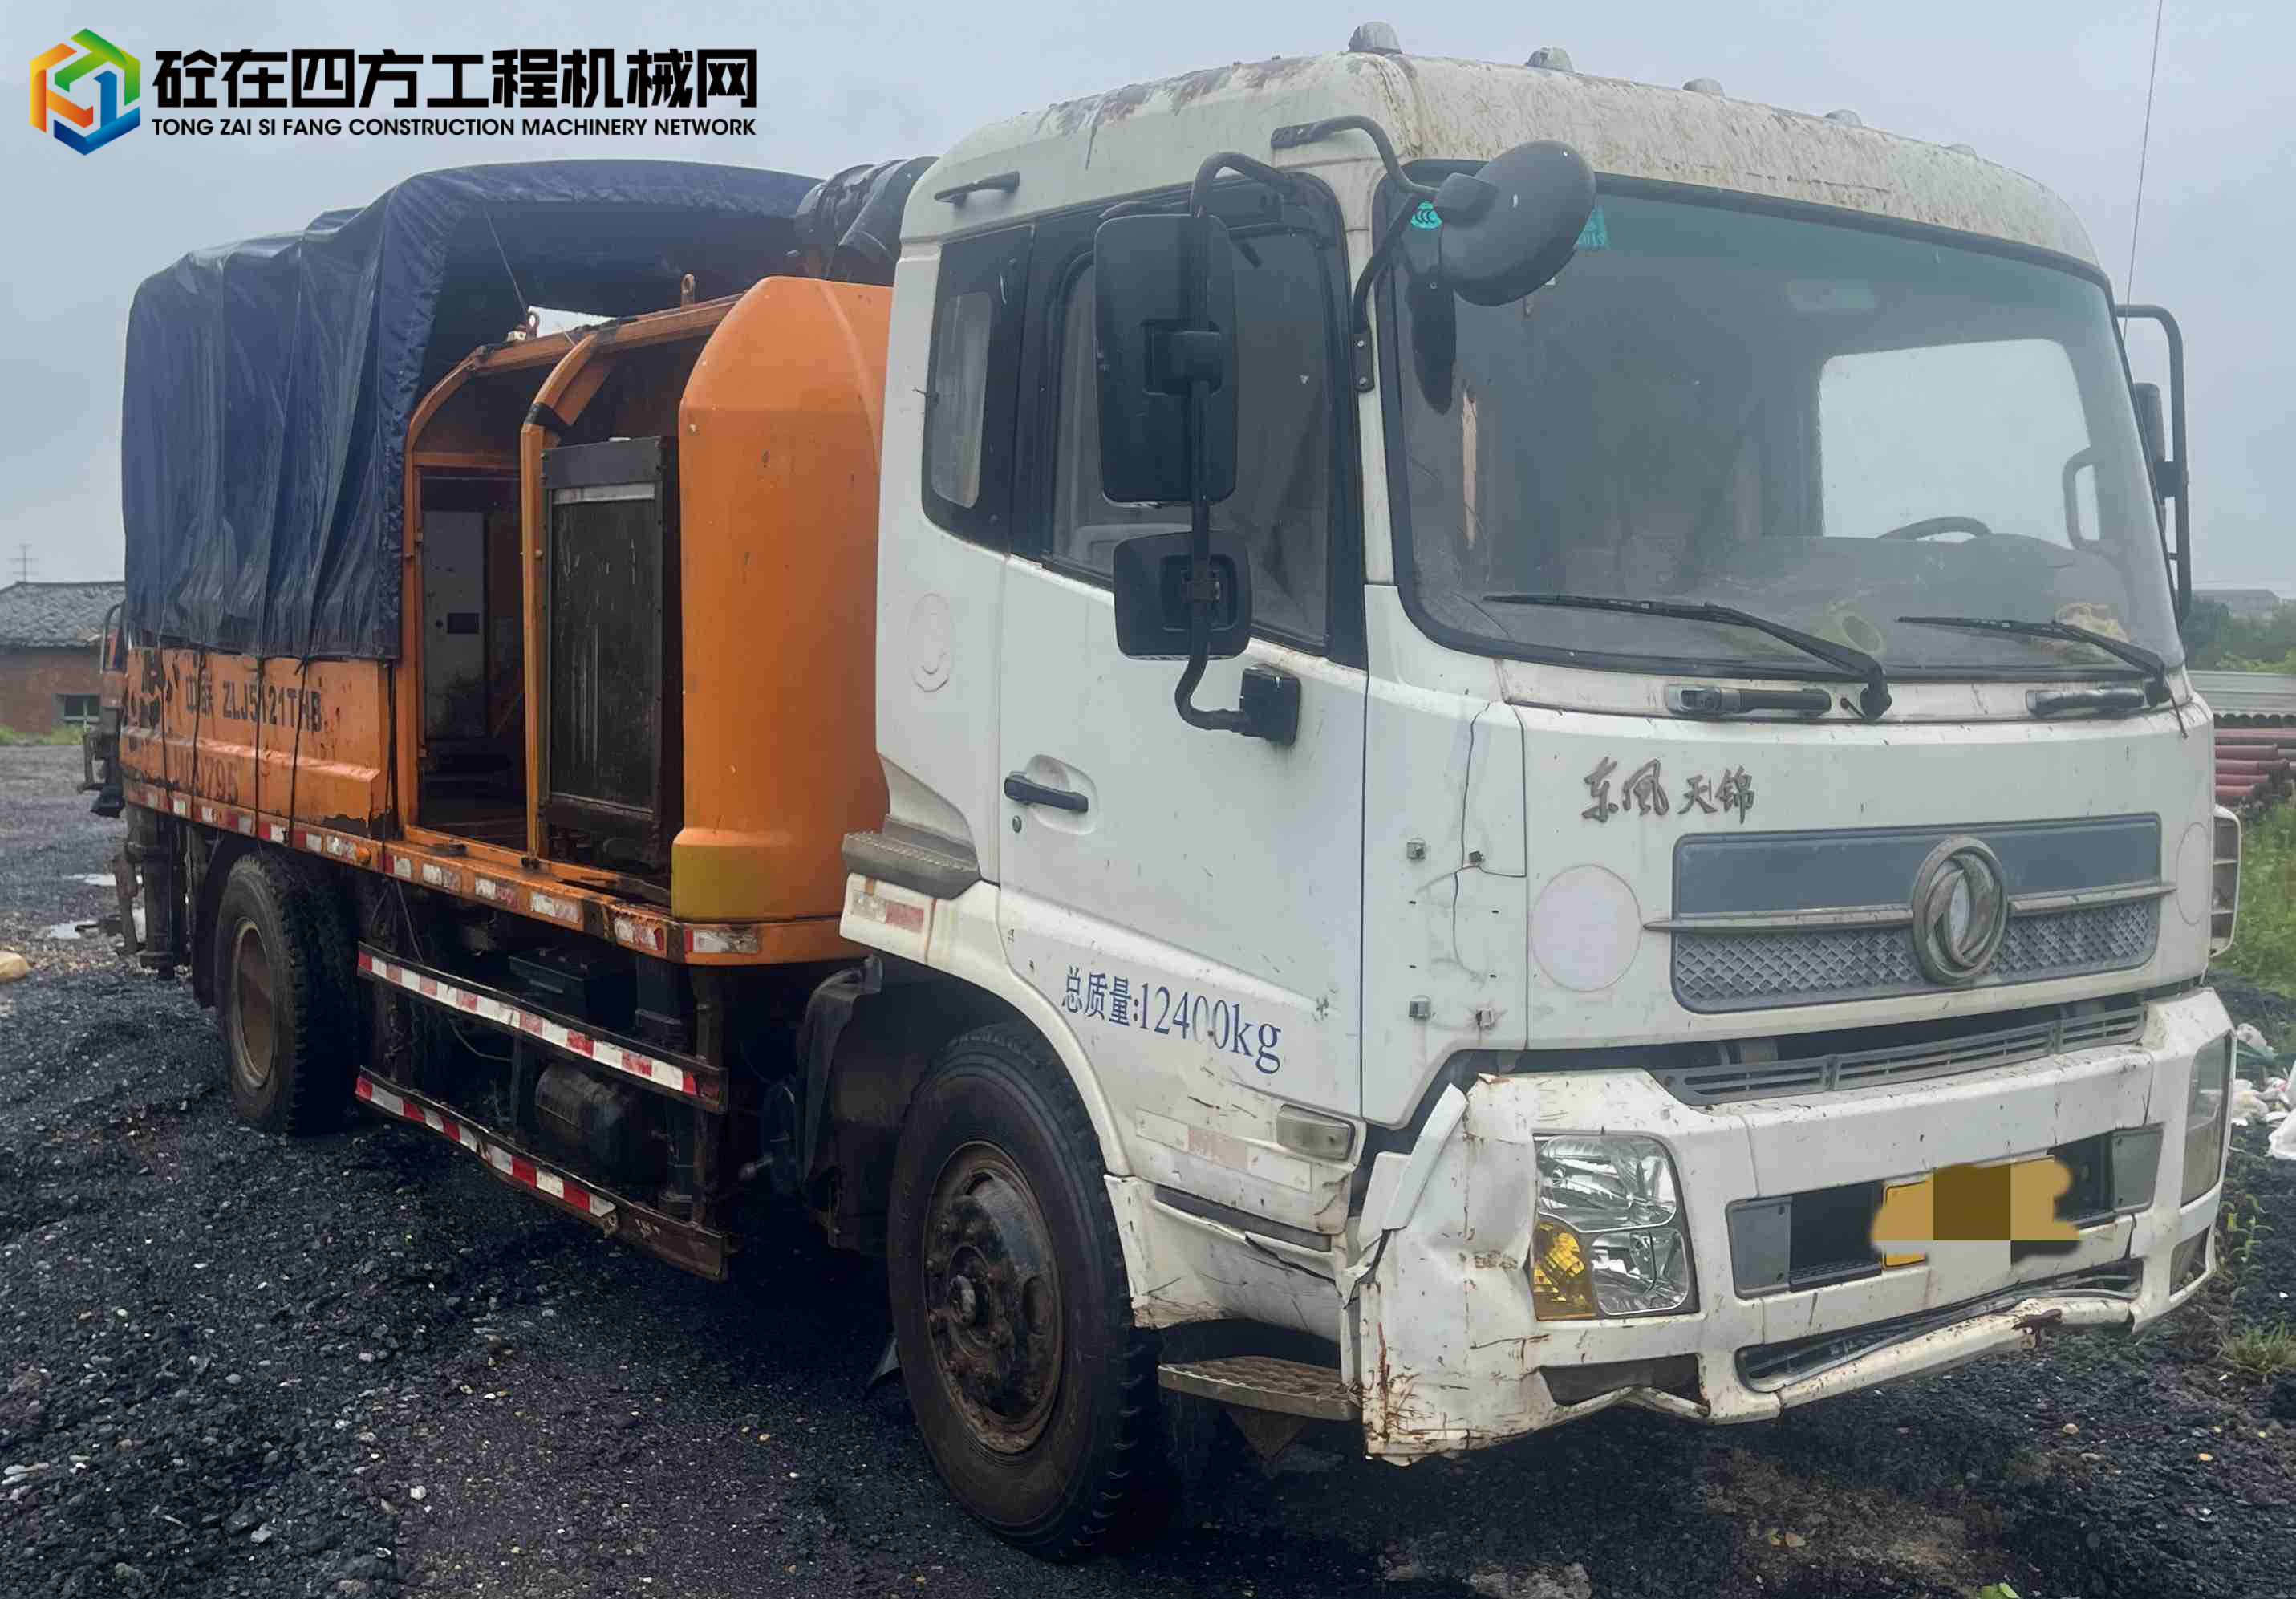 https://images.tongzsf.com/tong/truck_machine/20230920/1650ab61a0ebef.jpg